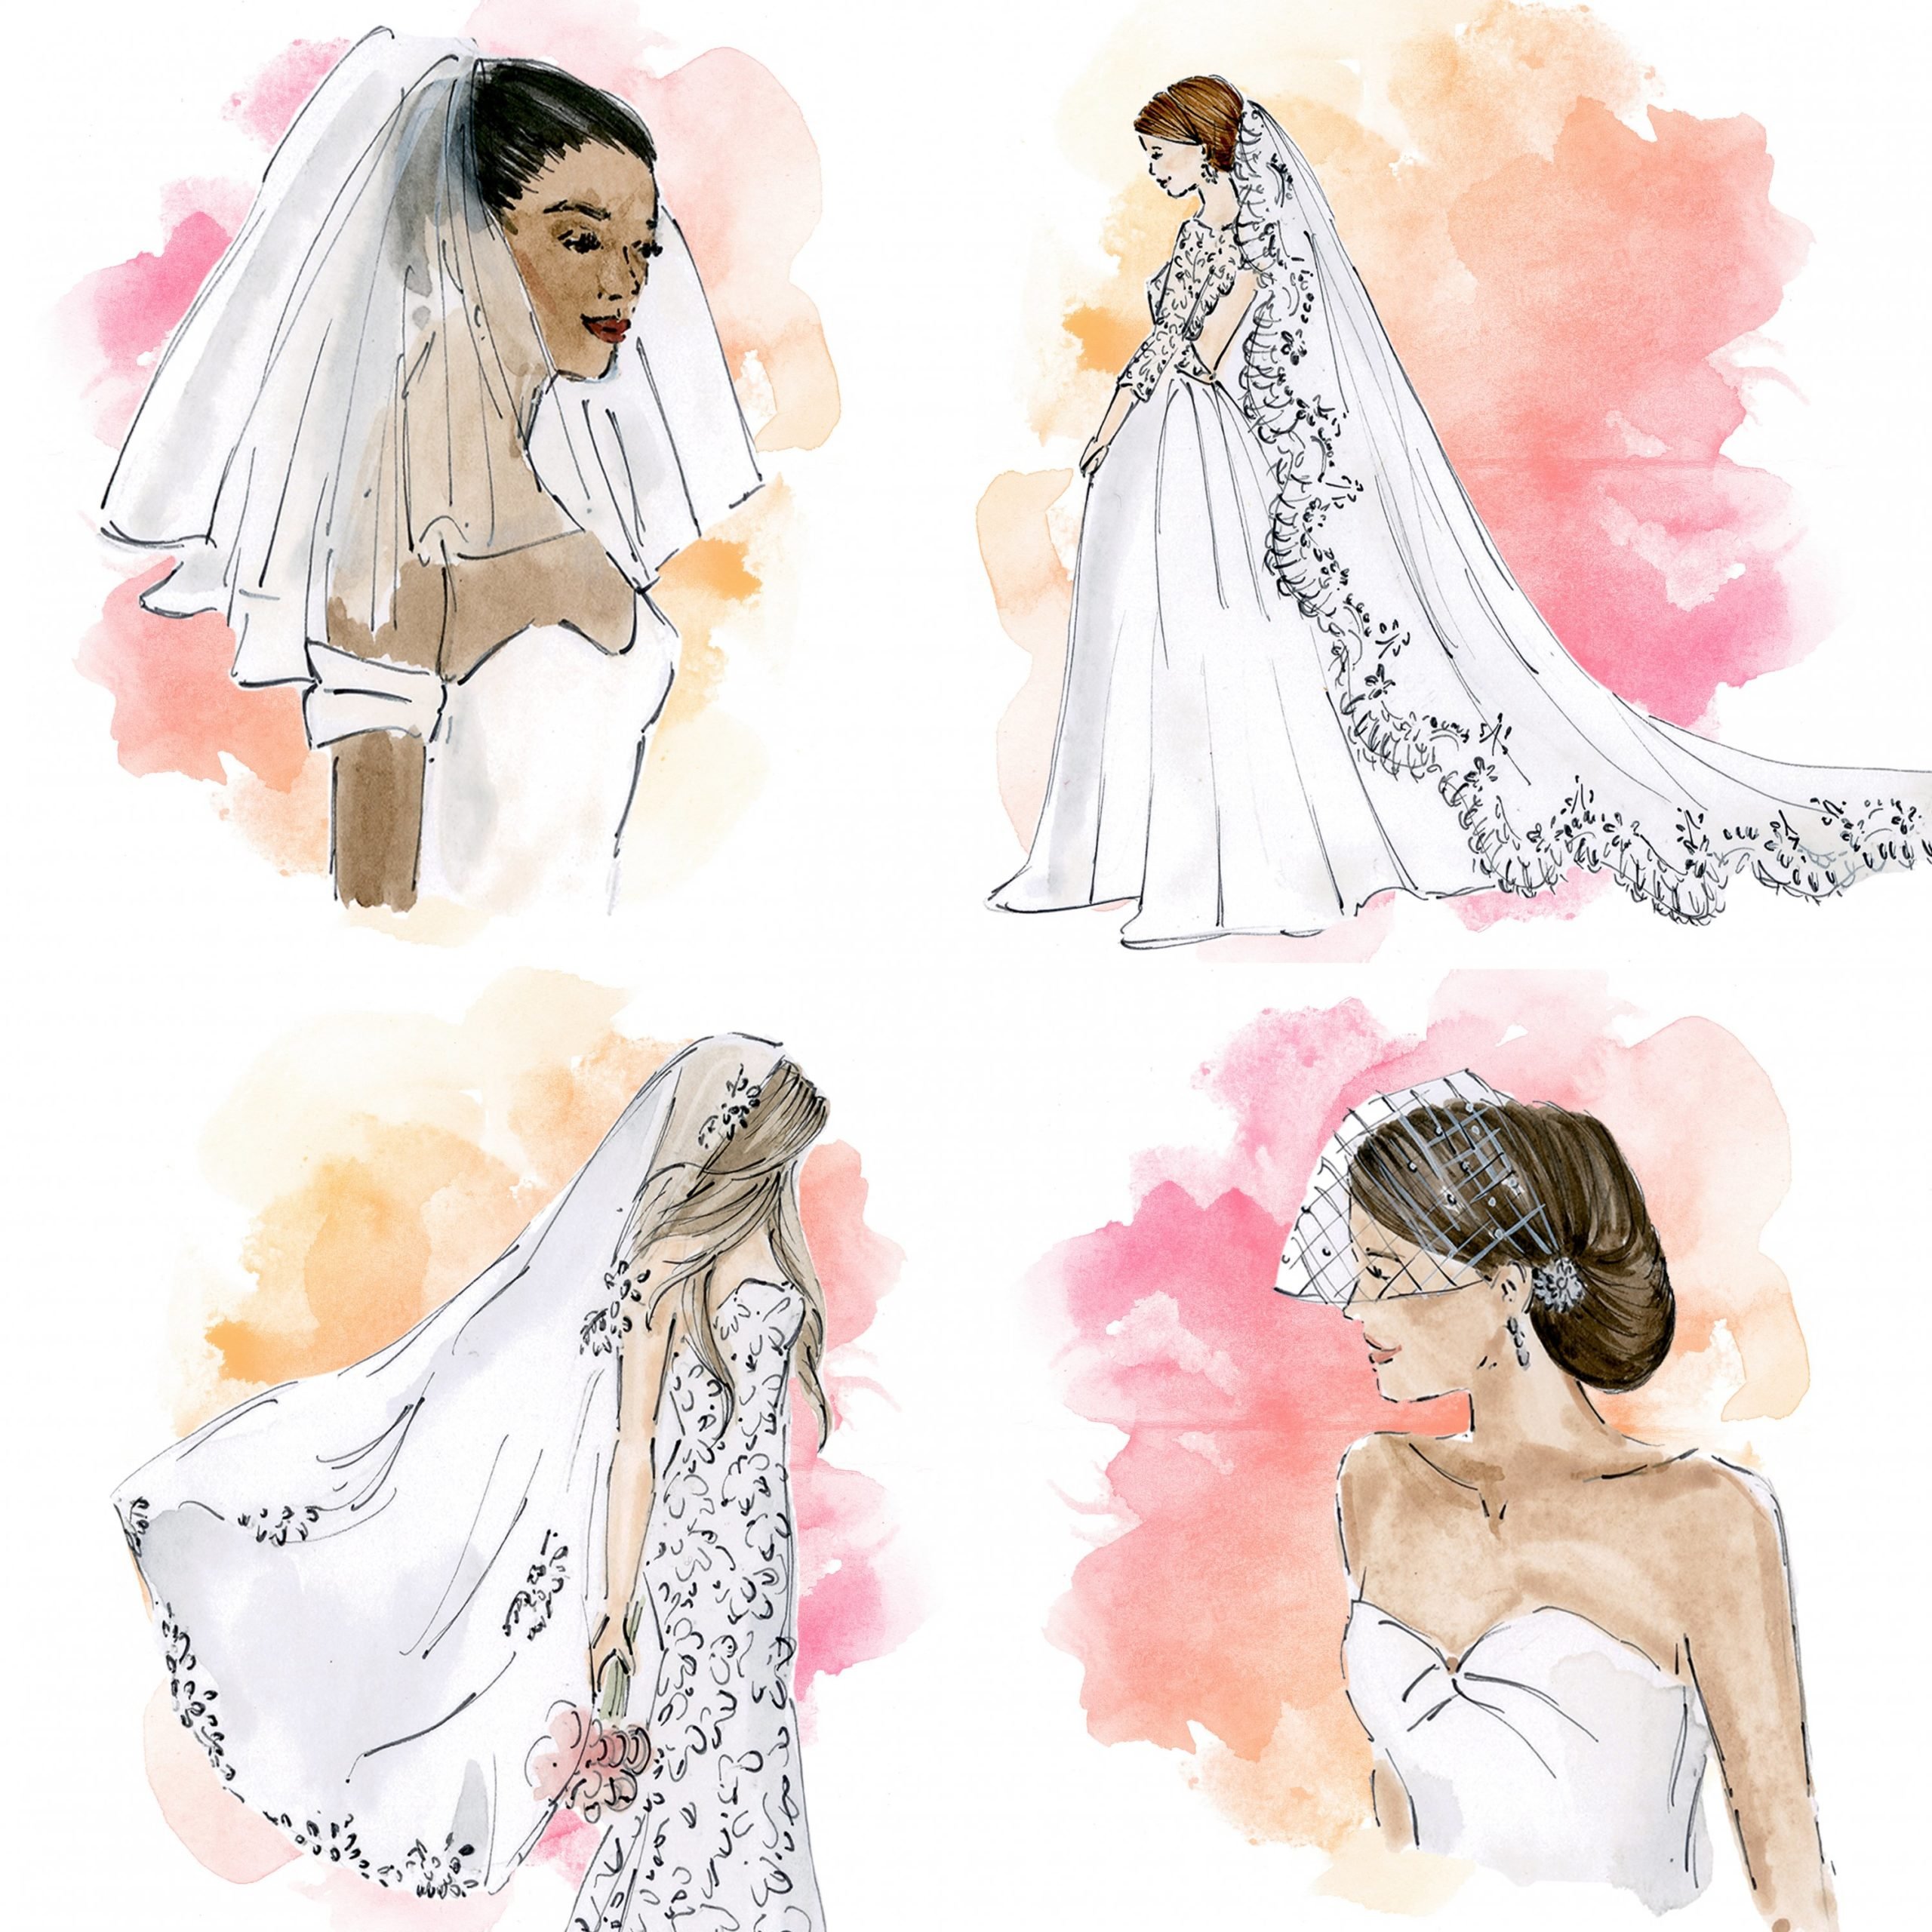 The Wedding Veil Lengths Guide: Get the Right Length for Your